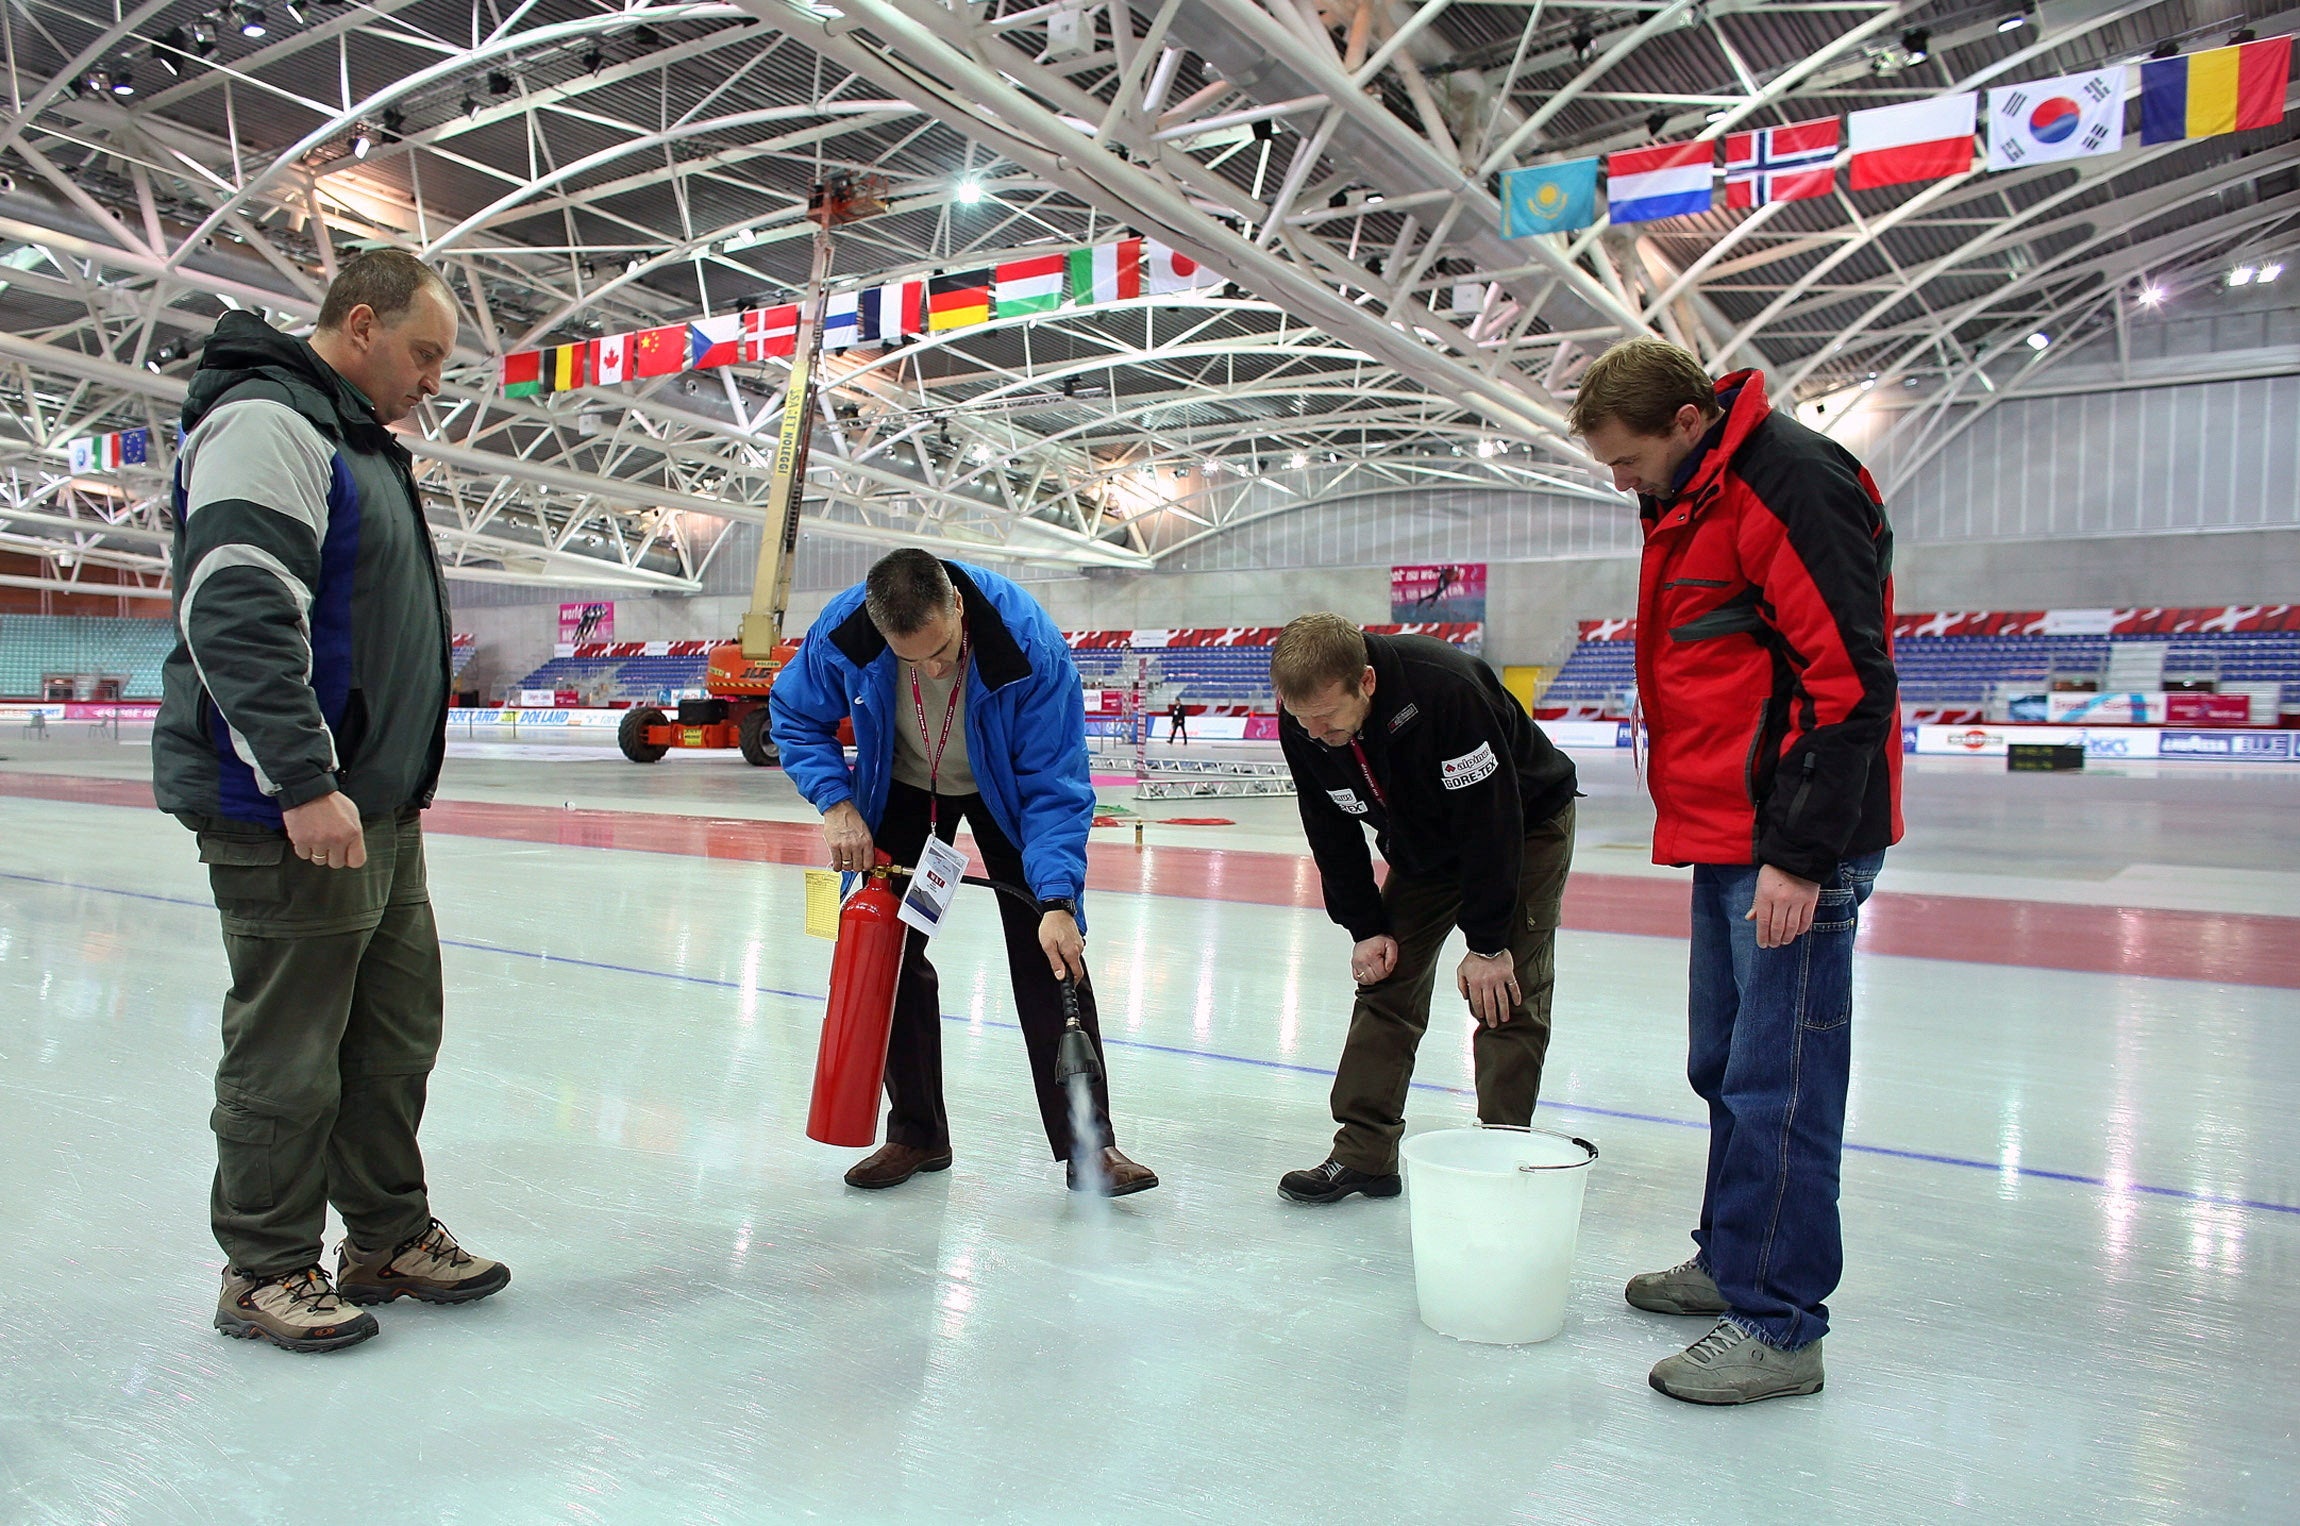 Canadian Ice Master Mark Messer (2nd L) uses a fire extinguisher to repair the ice at the 2006 Olympic speedskating venue "The Oval Lingotto" as his colleagues watch during a team practise for the World Cup Speed Skating tournament in Turin December 8, 2005. REUTERS/Jerry Lampen/File Photo